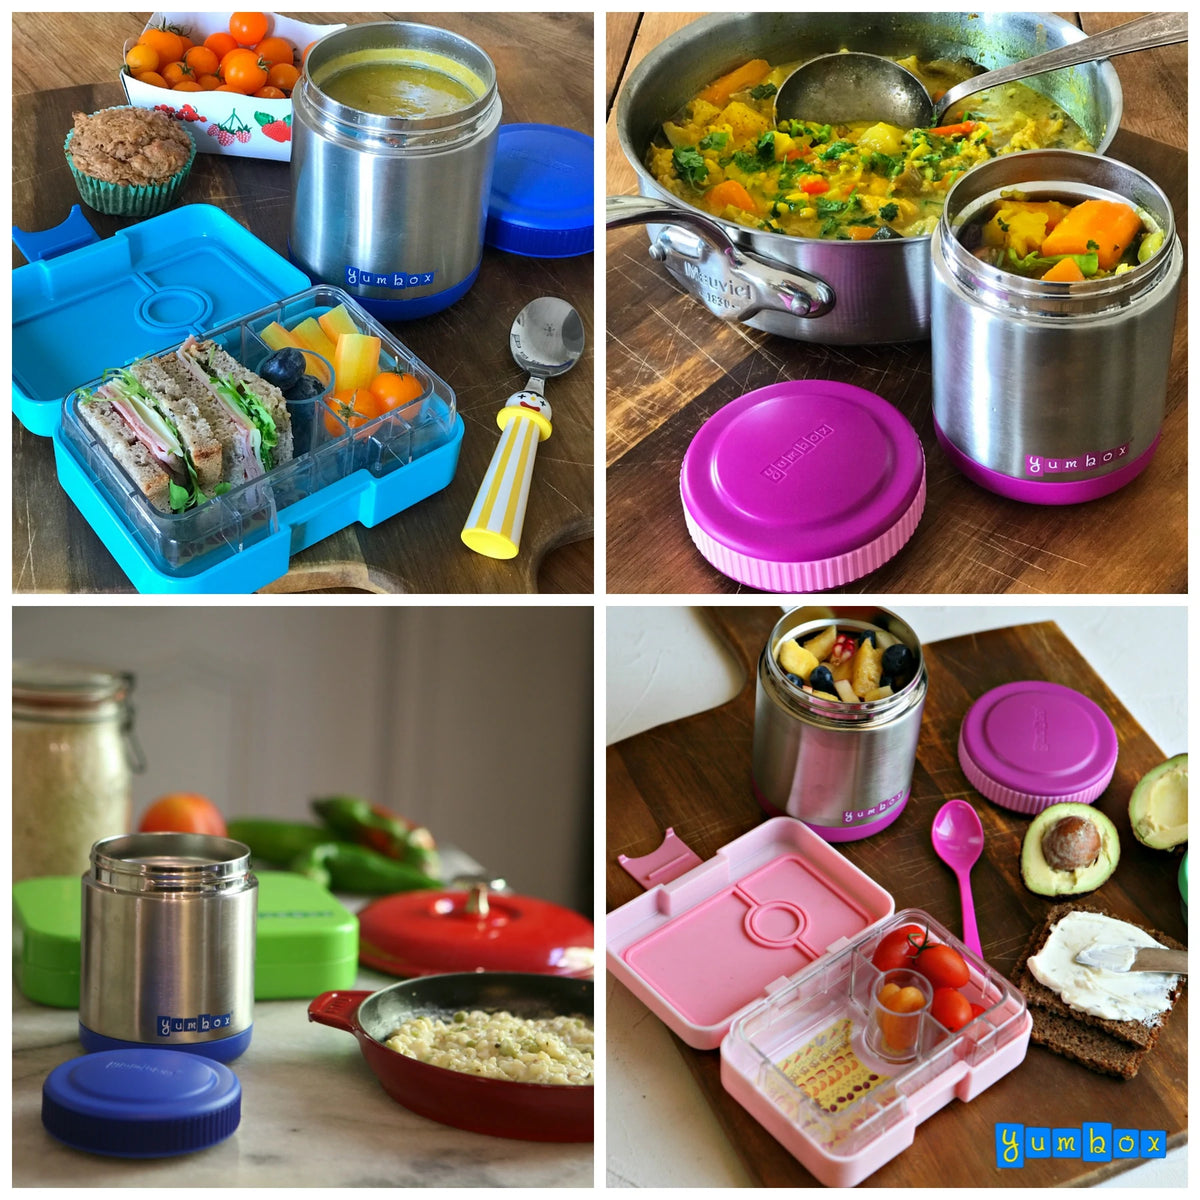 12 creative thermos lunch ideas besides the same old soup – SheKnows